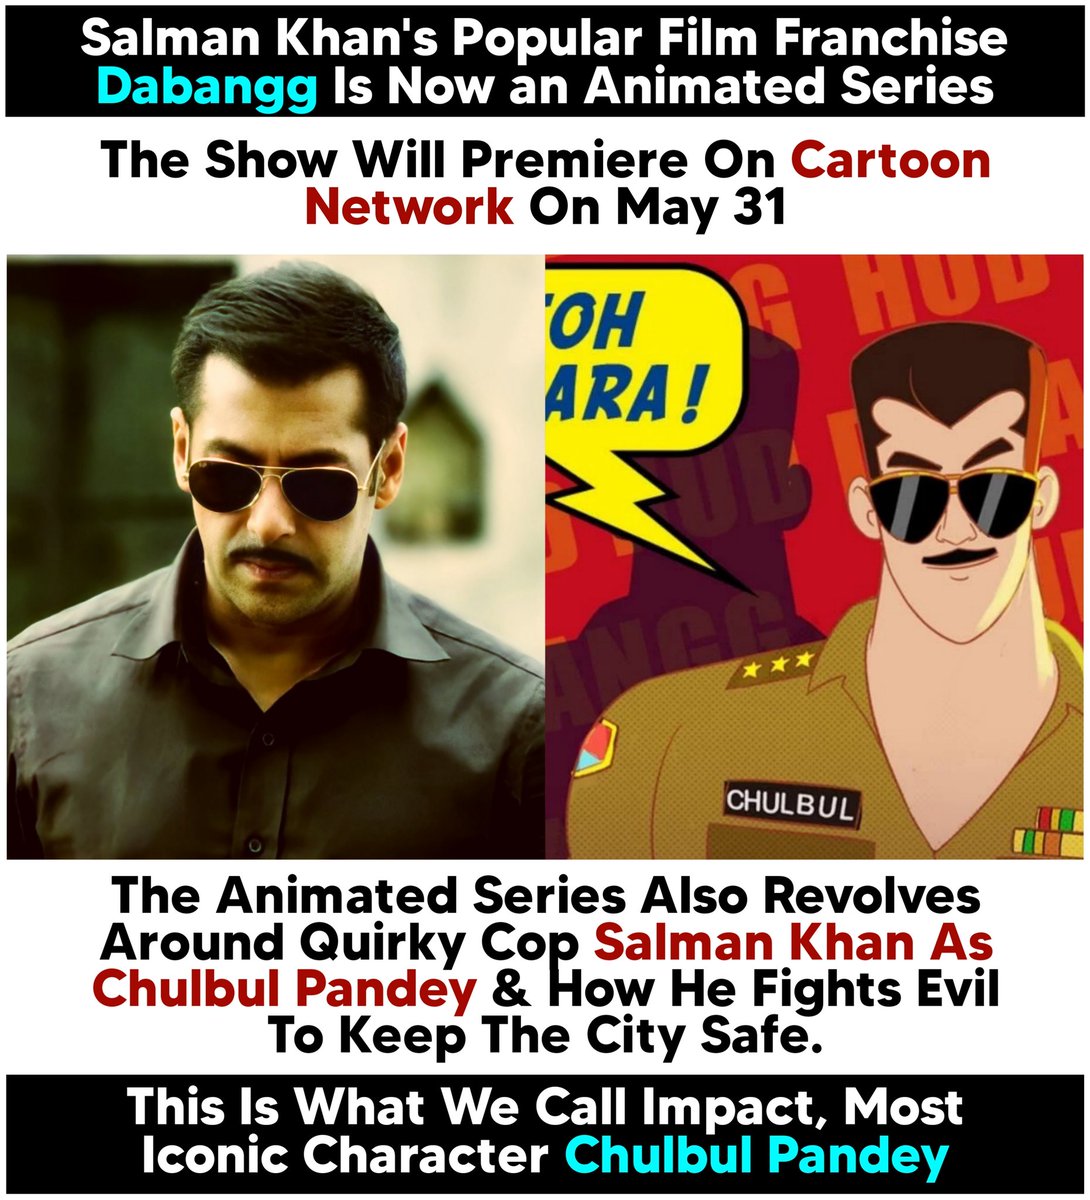 A 104 Episode Animated Series Of #SalmanKhan's #Dabangg On @cartoonnetwork starting from 31st May 💥 Produced by Cosmos-Maya & Warner medias
#ChulbulPandey